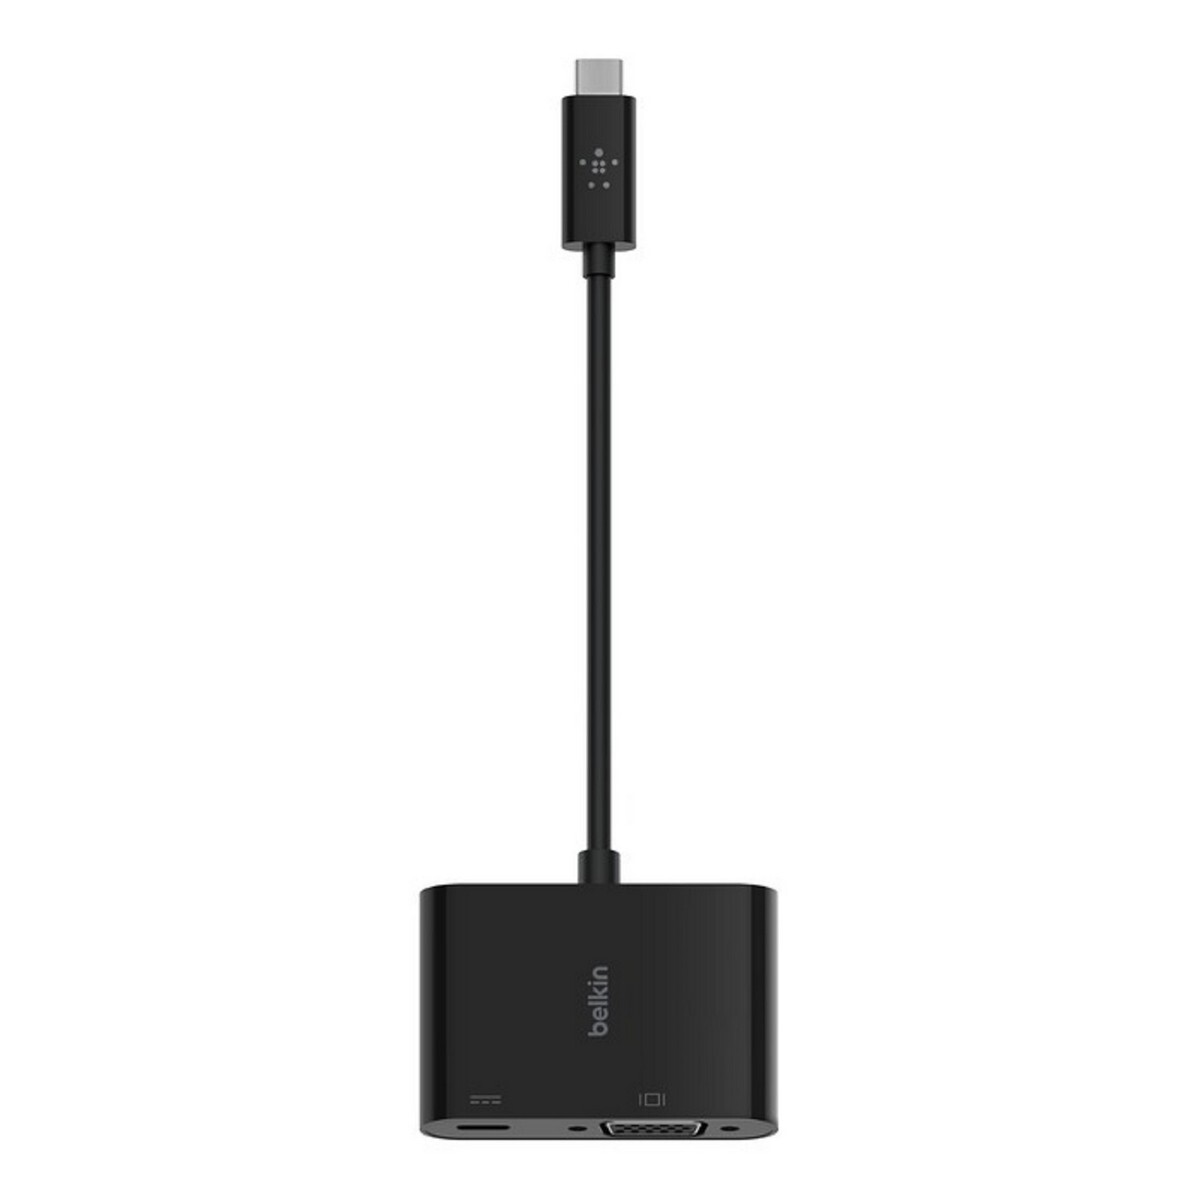 Belkin USB-C to VGA Charger Adapter